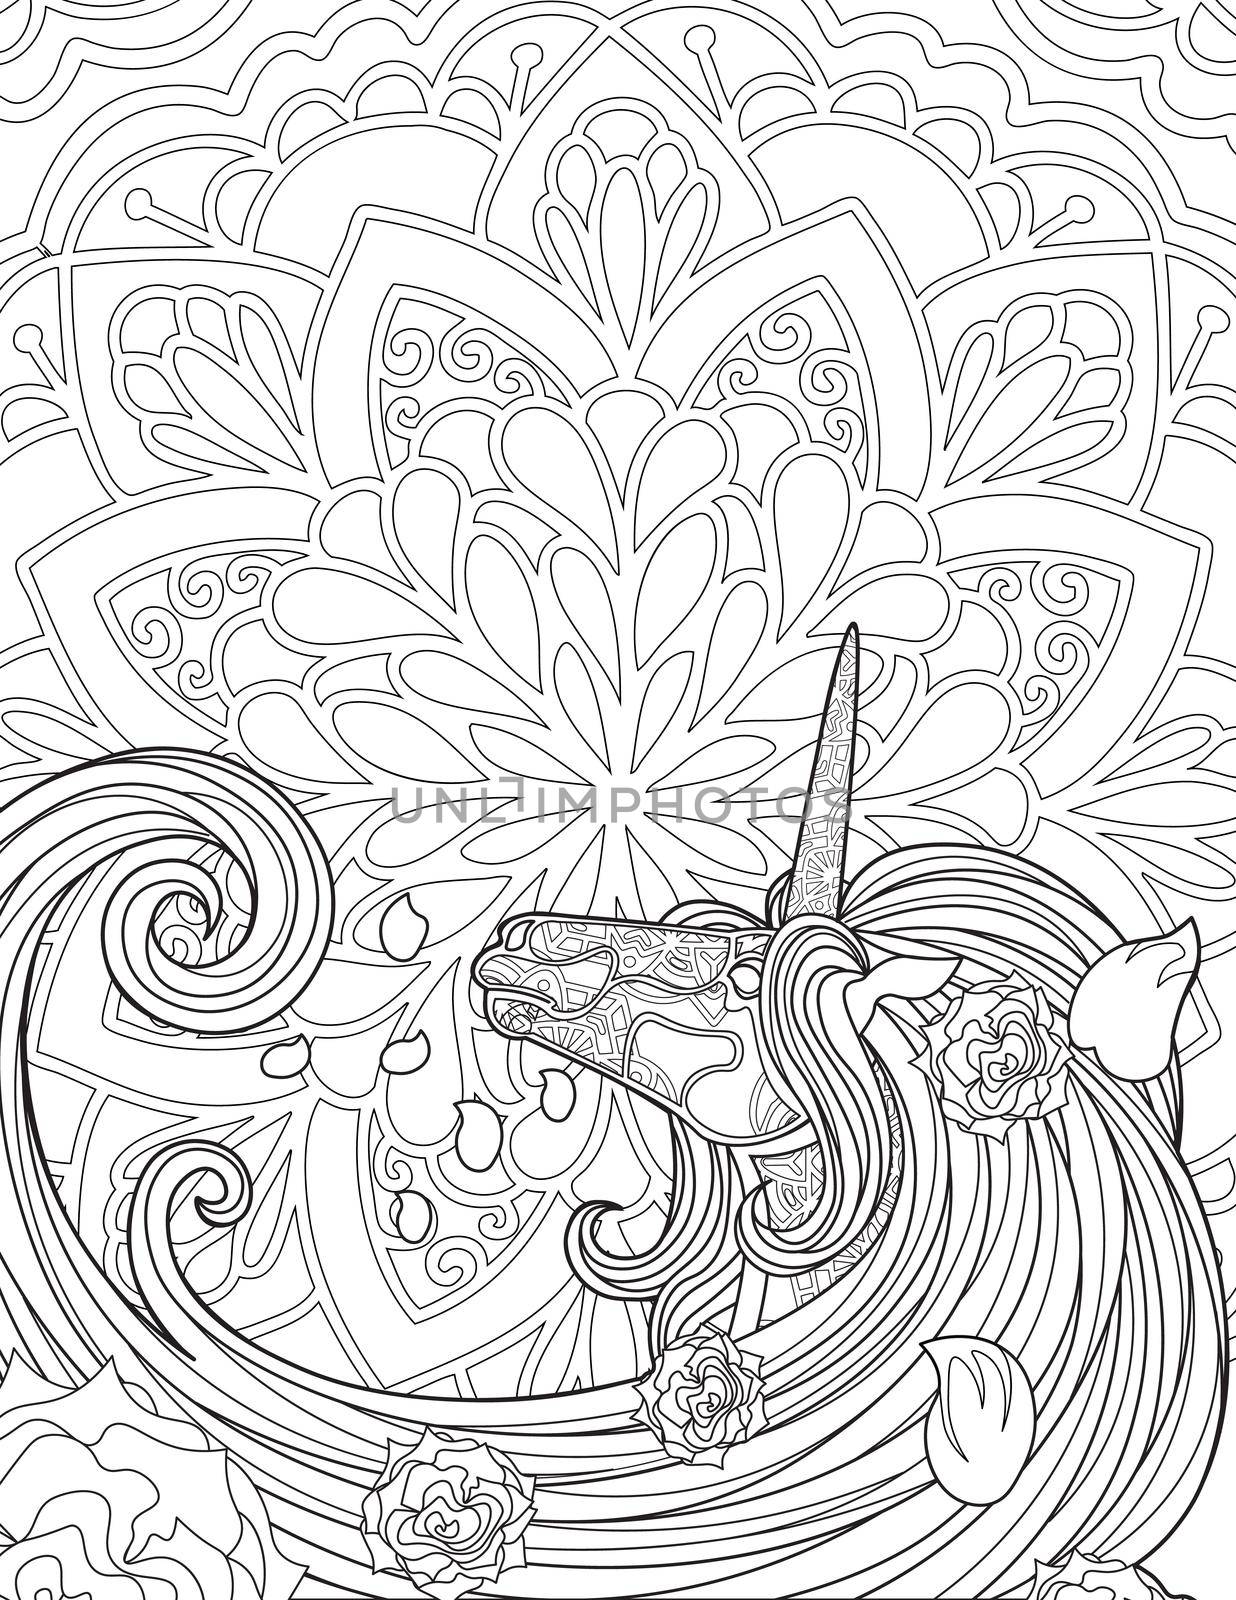 Unicorn Looking Back On A Flower Background With Flowers Over Mane.